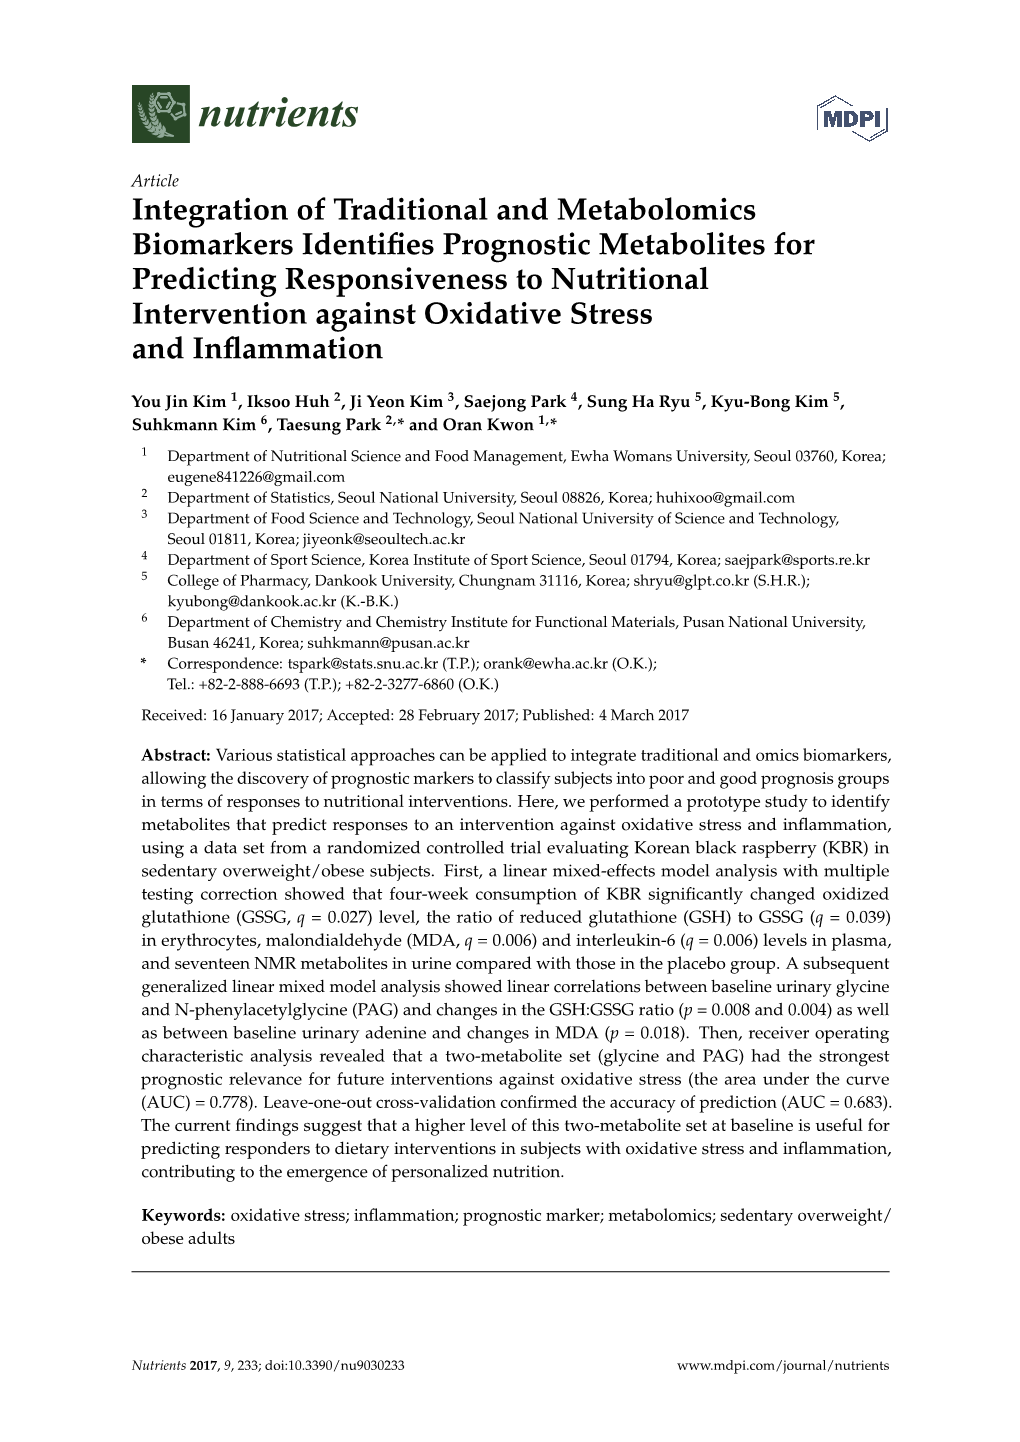 Integration of Traditional and Metabolomics Biomarkers Identifies